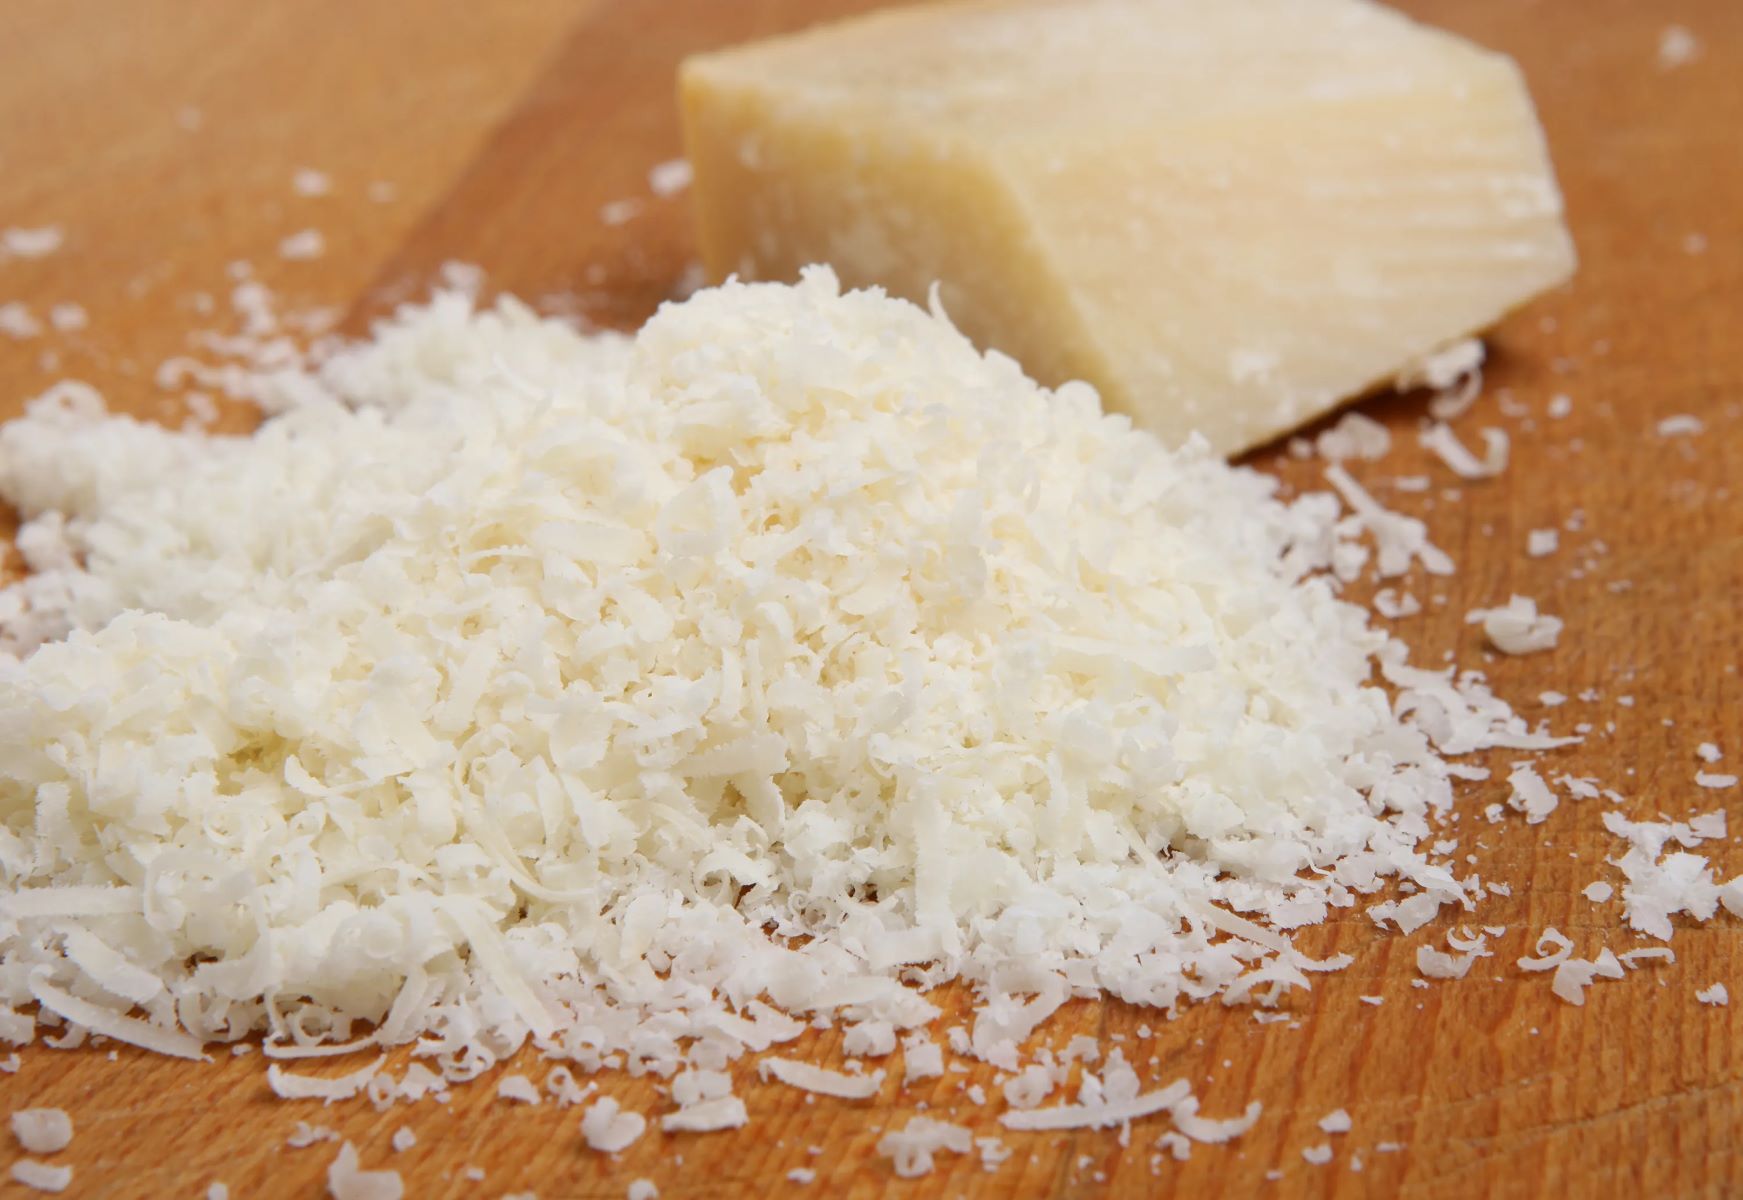 You Won't Believe What Happens When You Eat Expired Grated Parmesan!